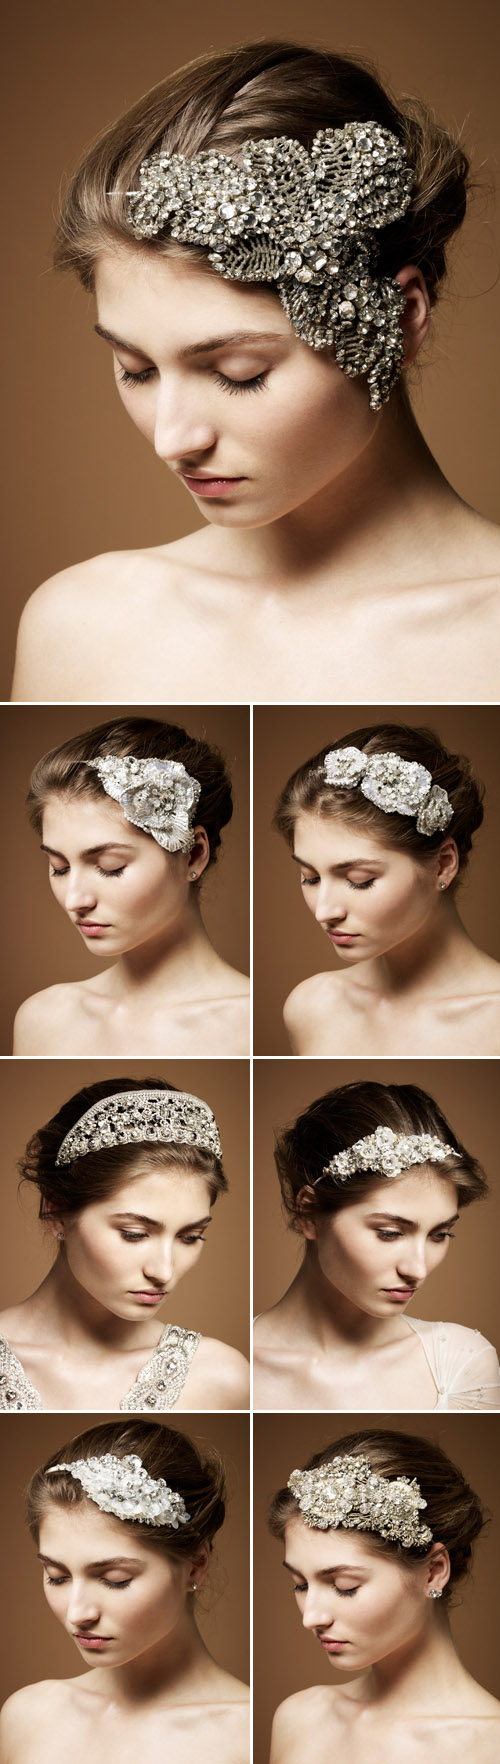 vintage inspired wedding hair accessories from jenny Packham